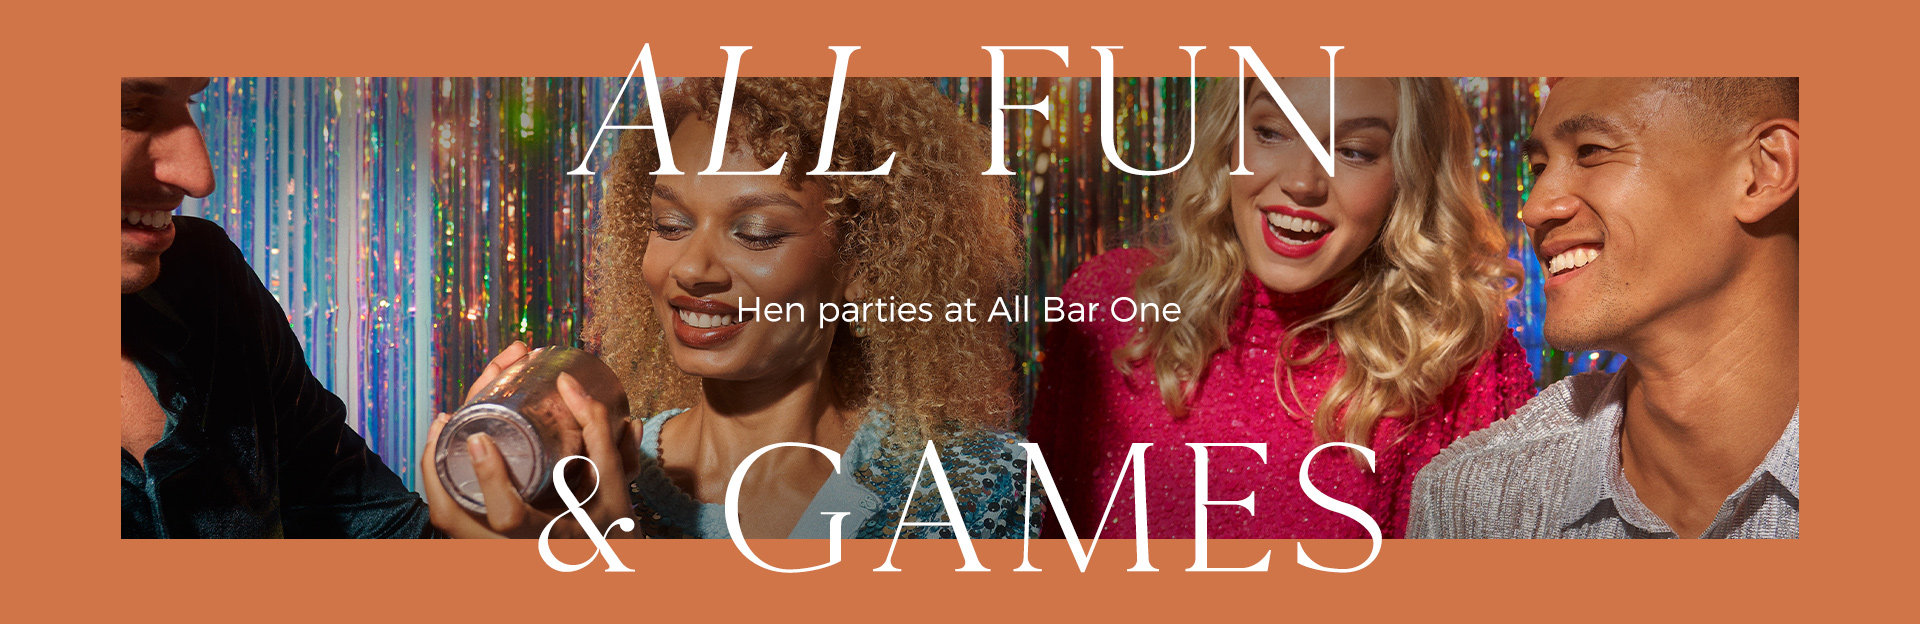 Hen parties at All Bar One Covent Garden